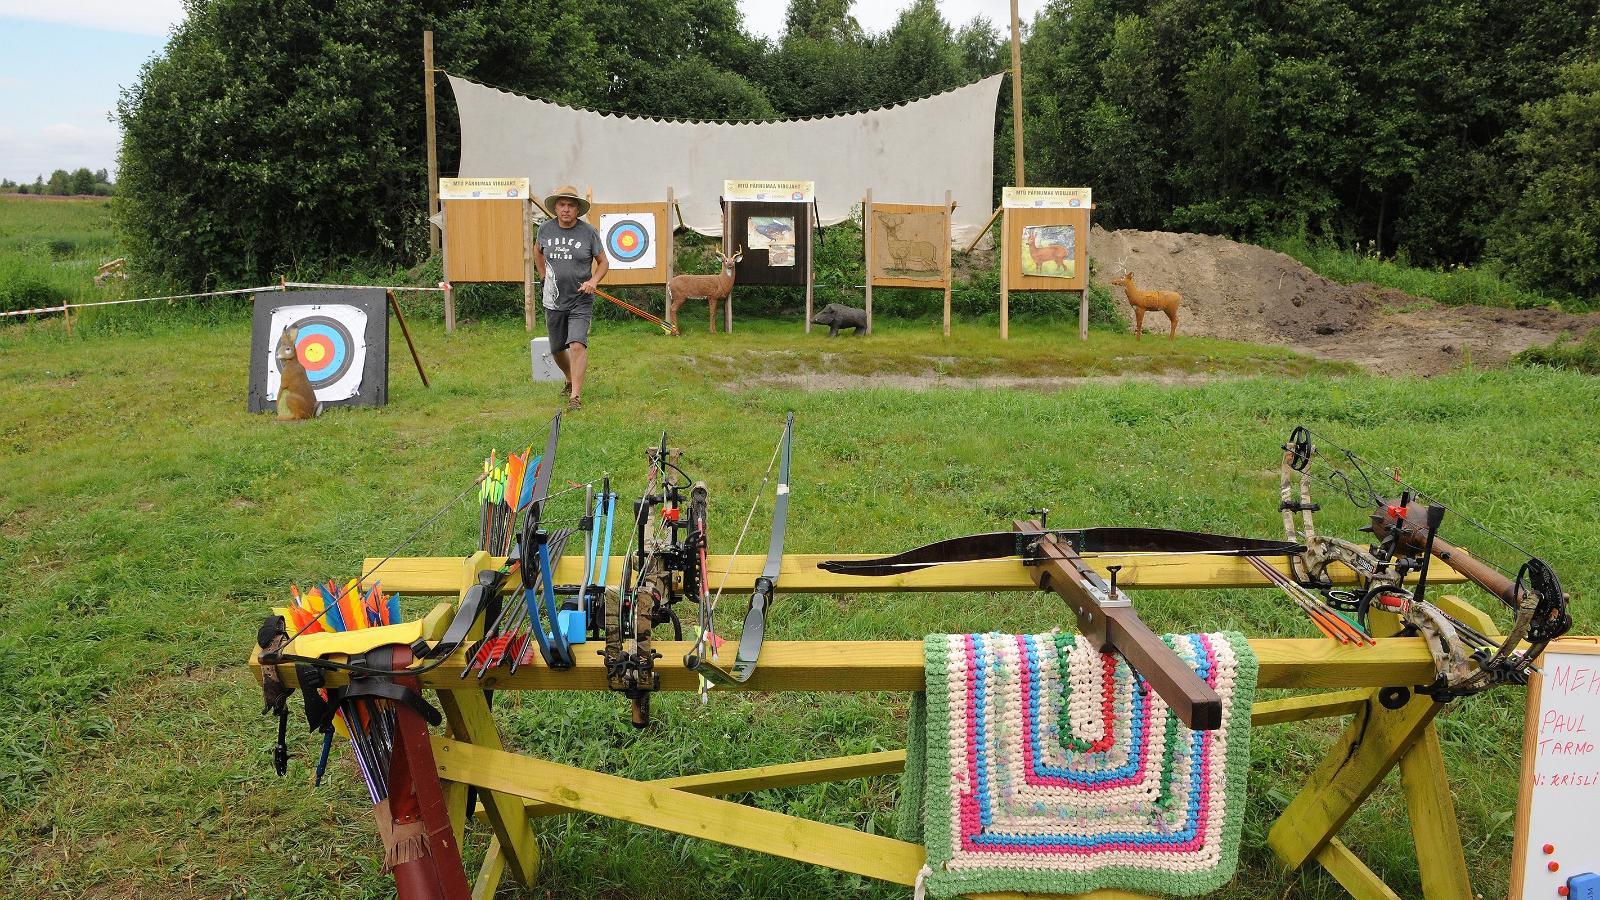 Shooting with the English longbow, a crossbow, and a compound bow